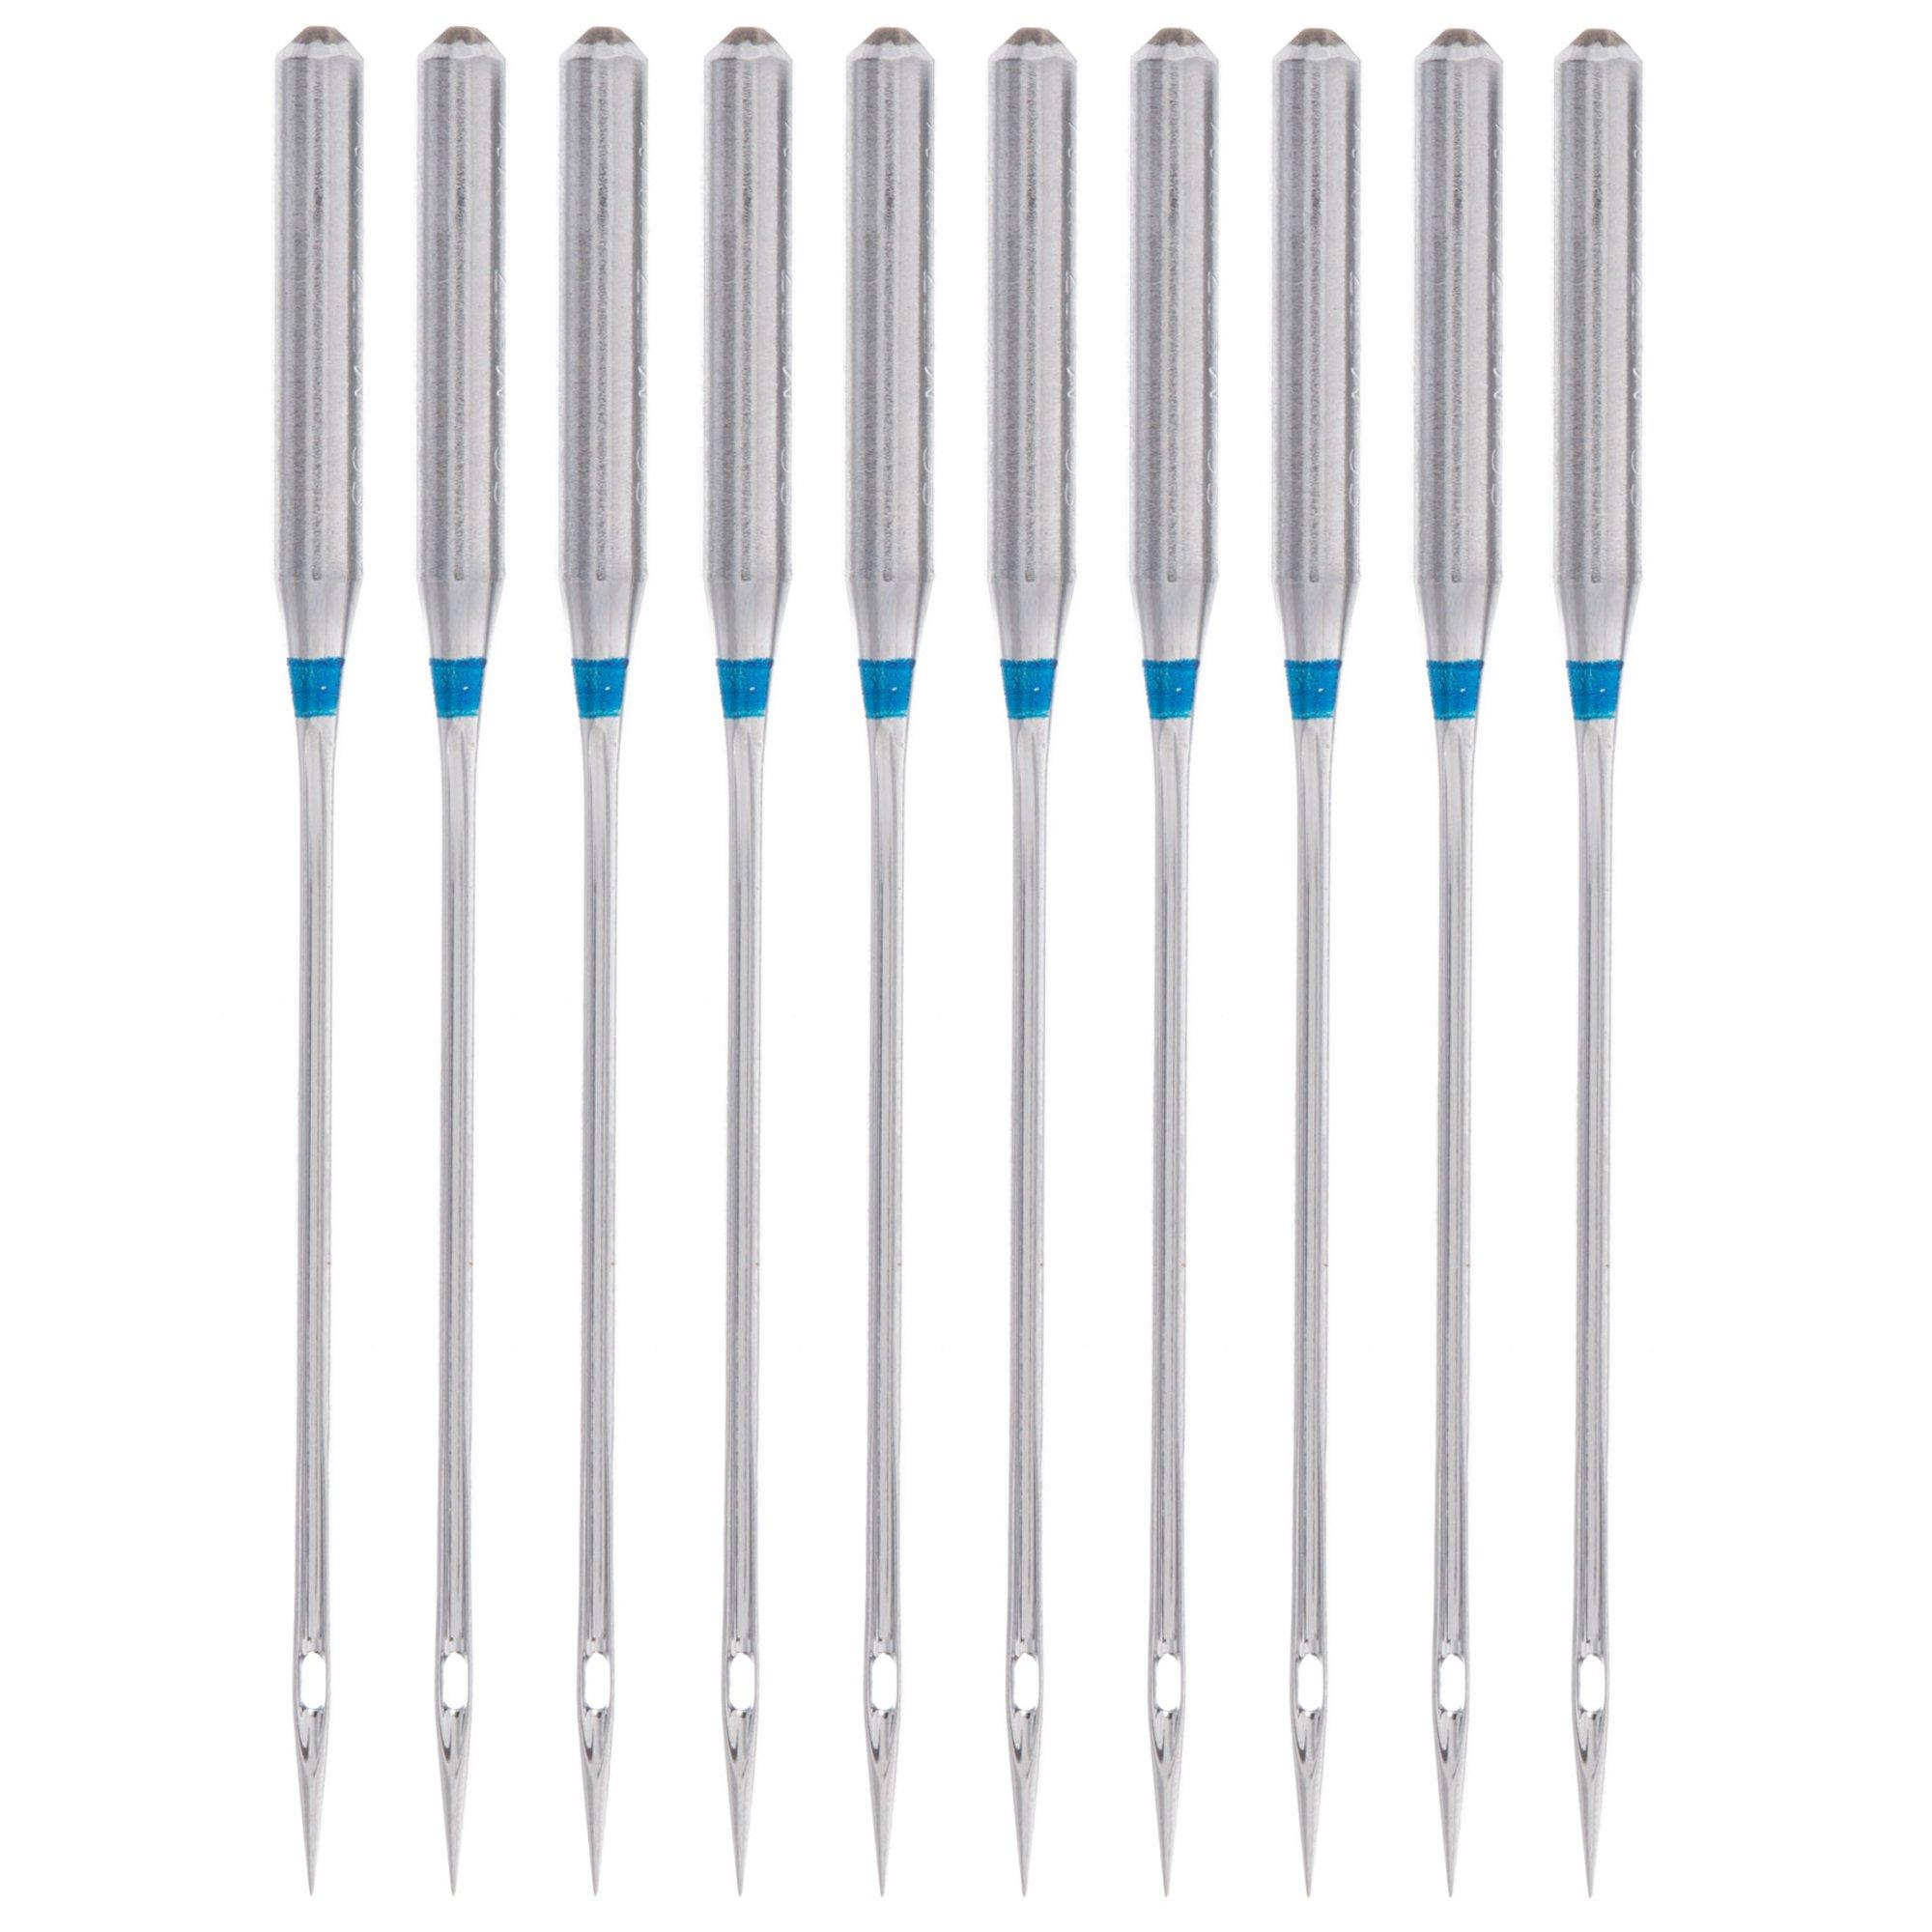 SCHMETZ Denim Needles Carded Assorted Sizes & Chrome Available – A